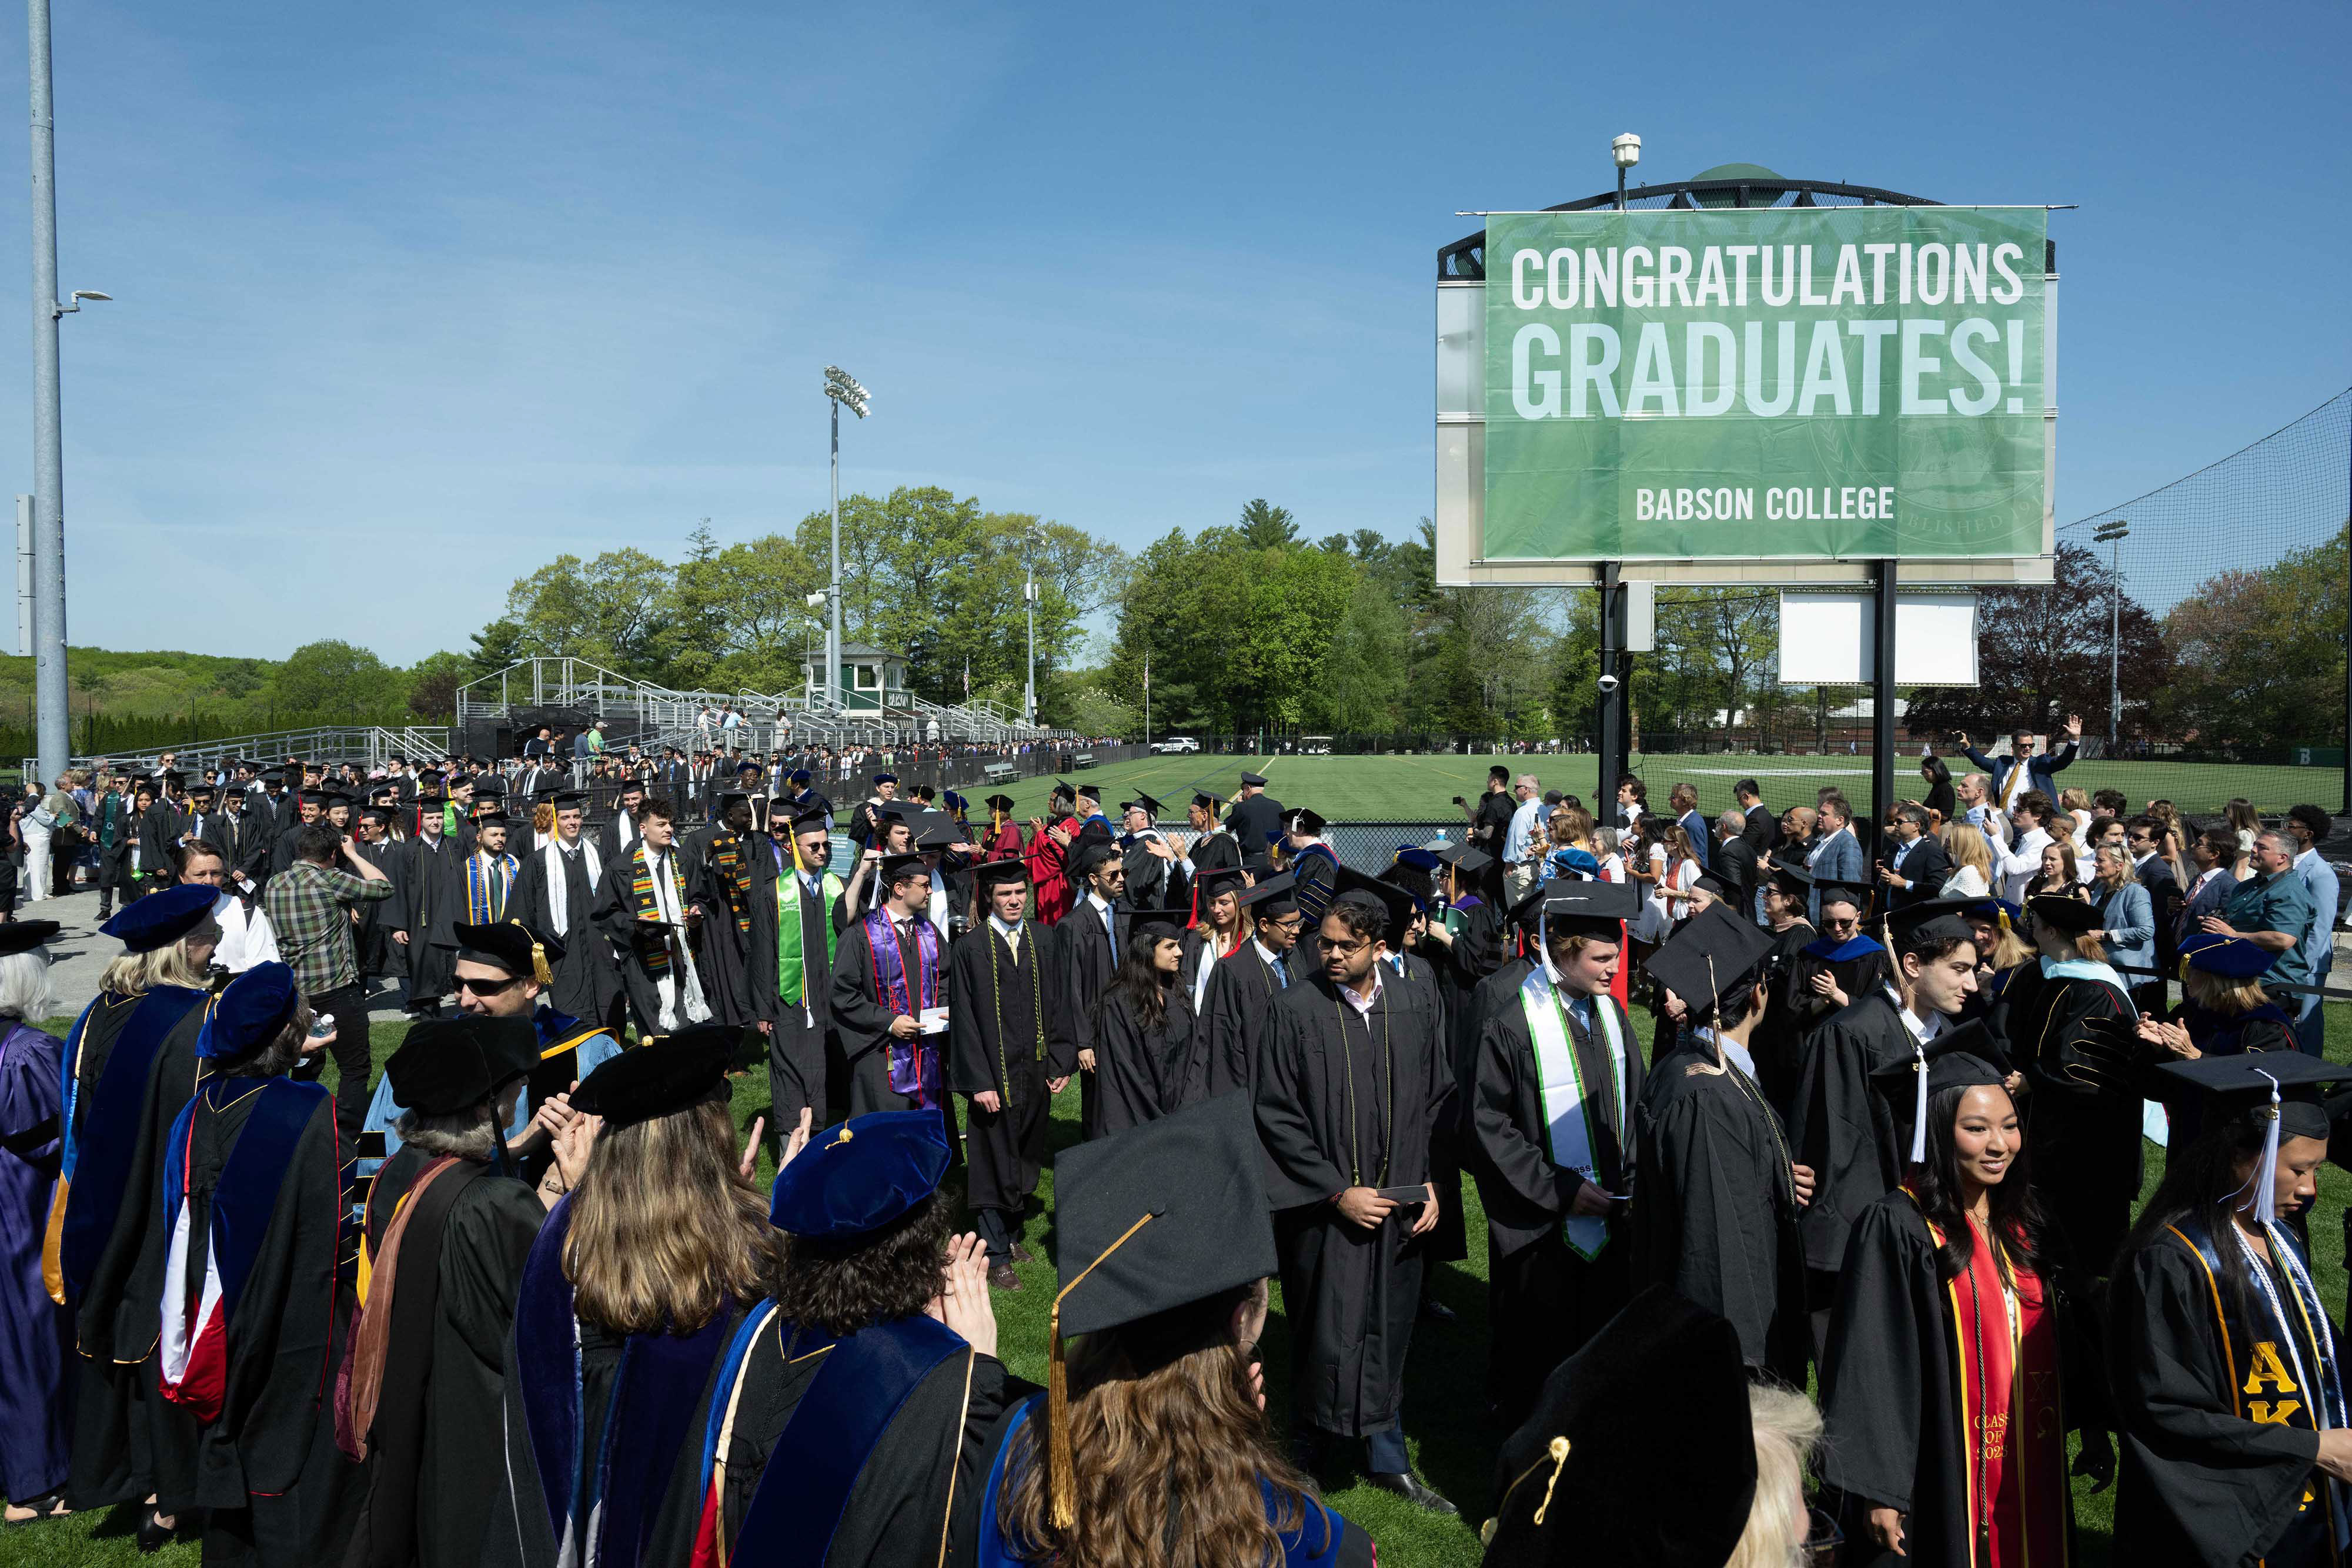 Babson College Commencement Ceremonies Celebrate the Class